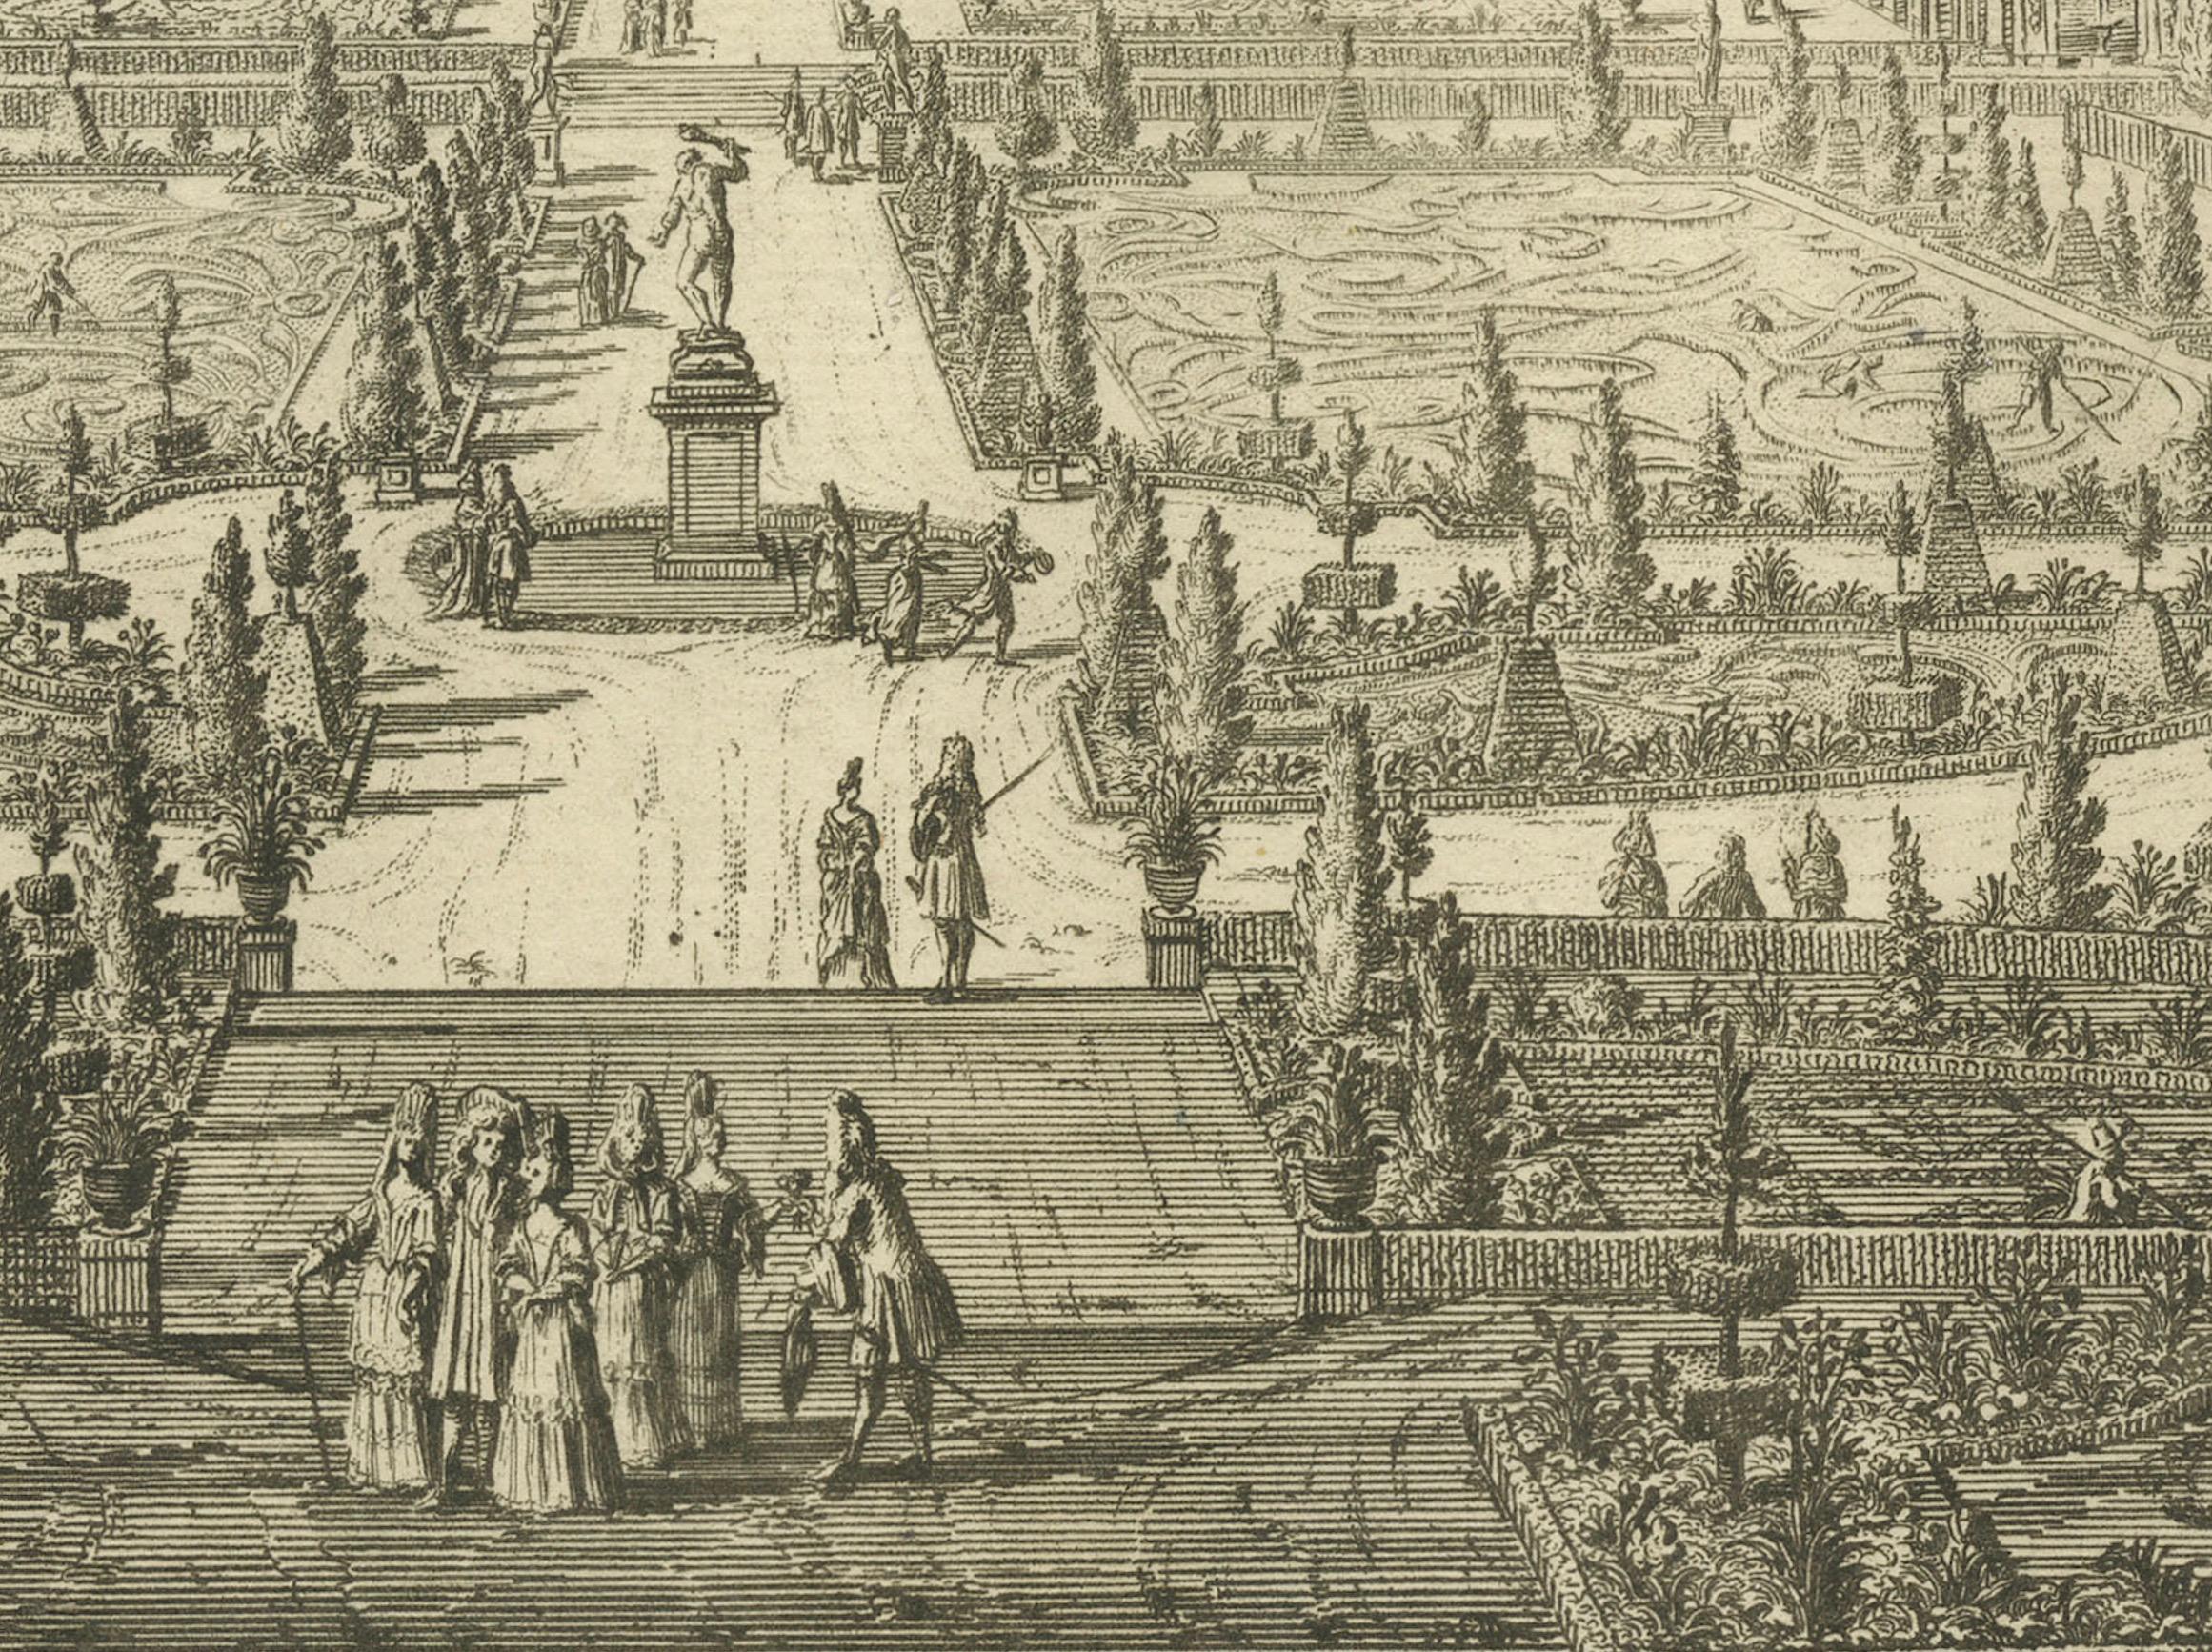 Late 17th Century The Ekolsund Castle and Gardens in Sweden in Swidde's 1695 Engraving For Sale